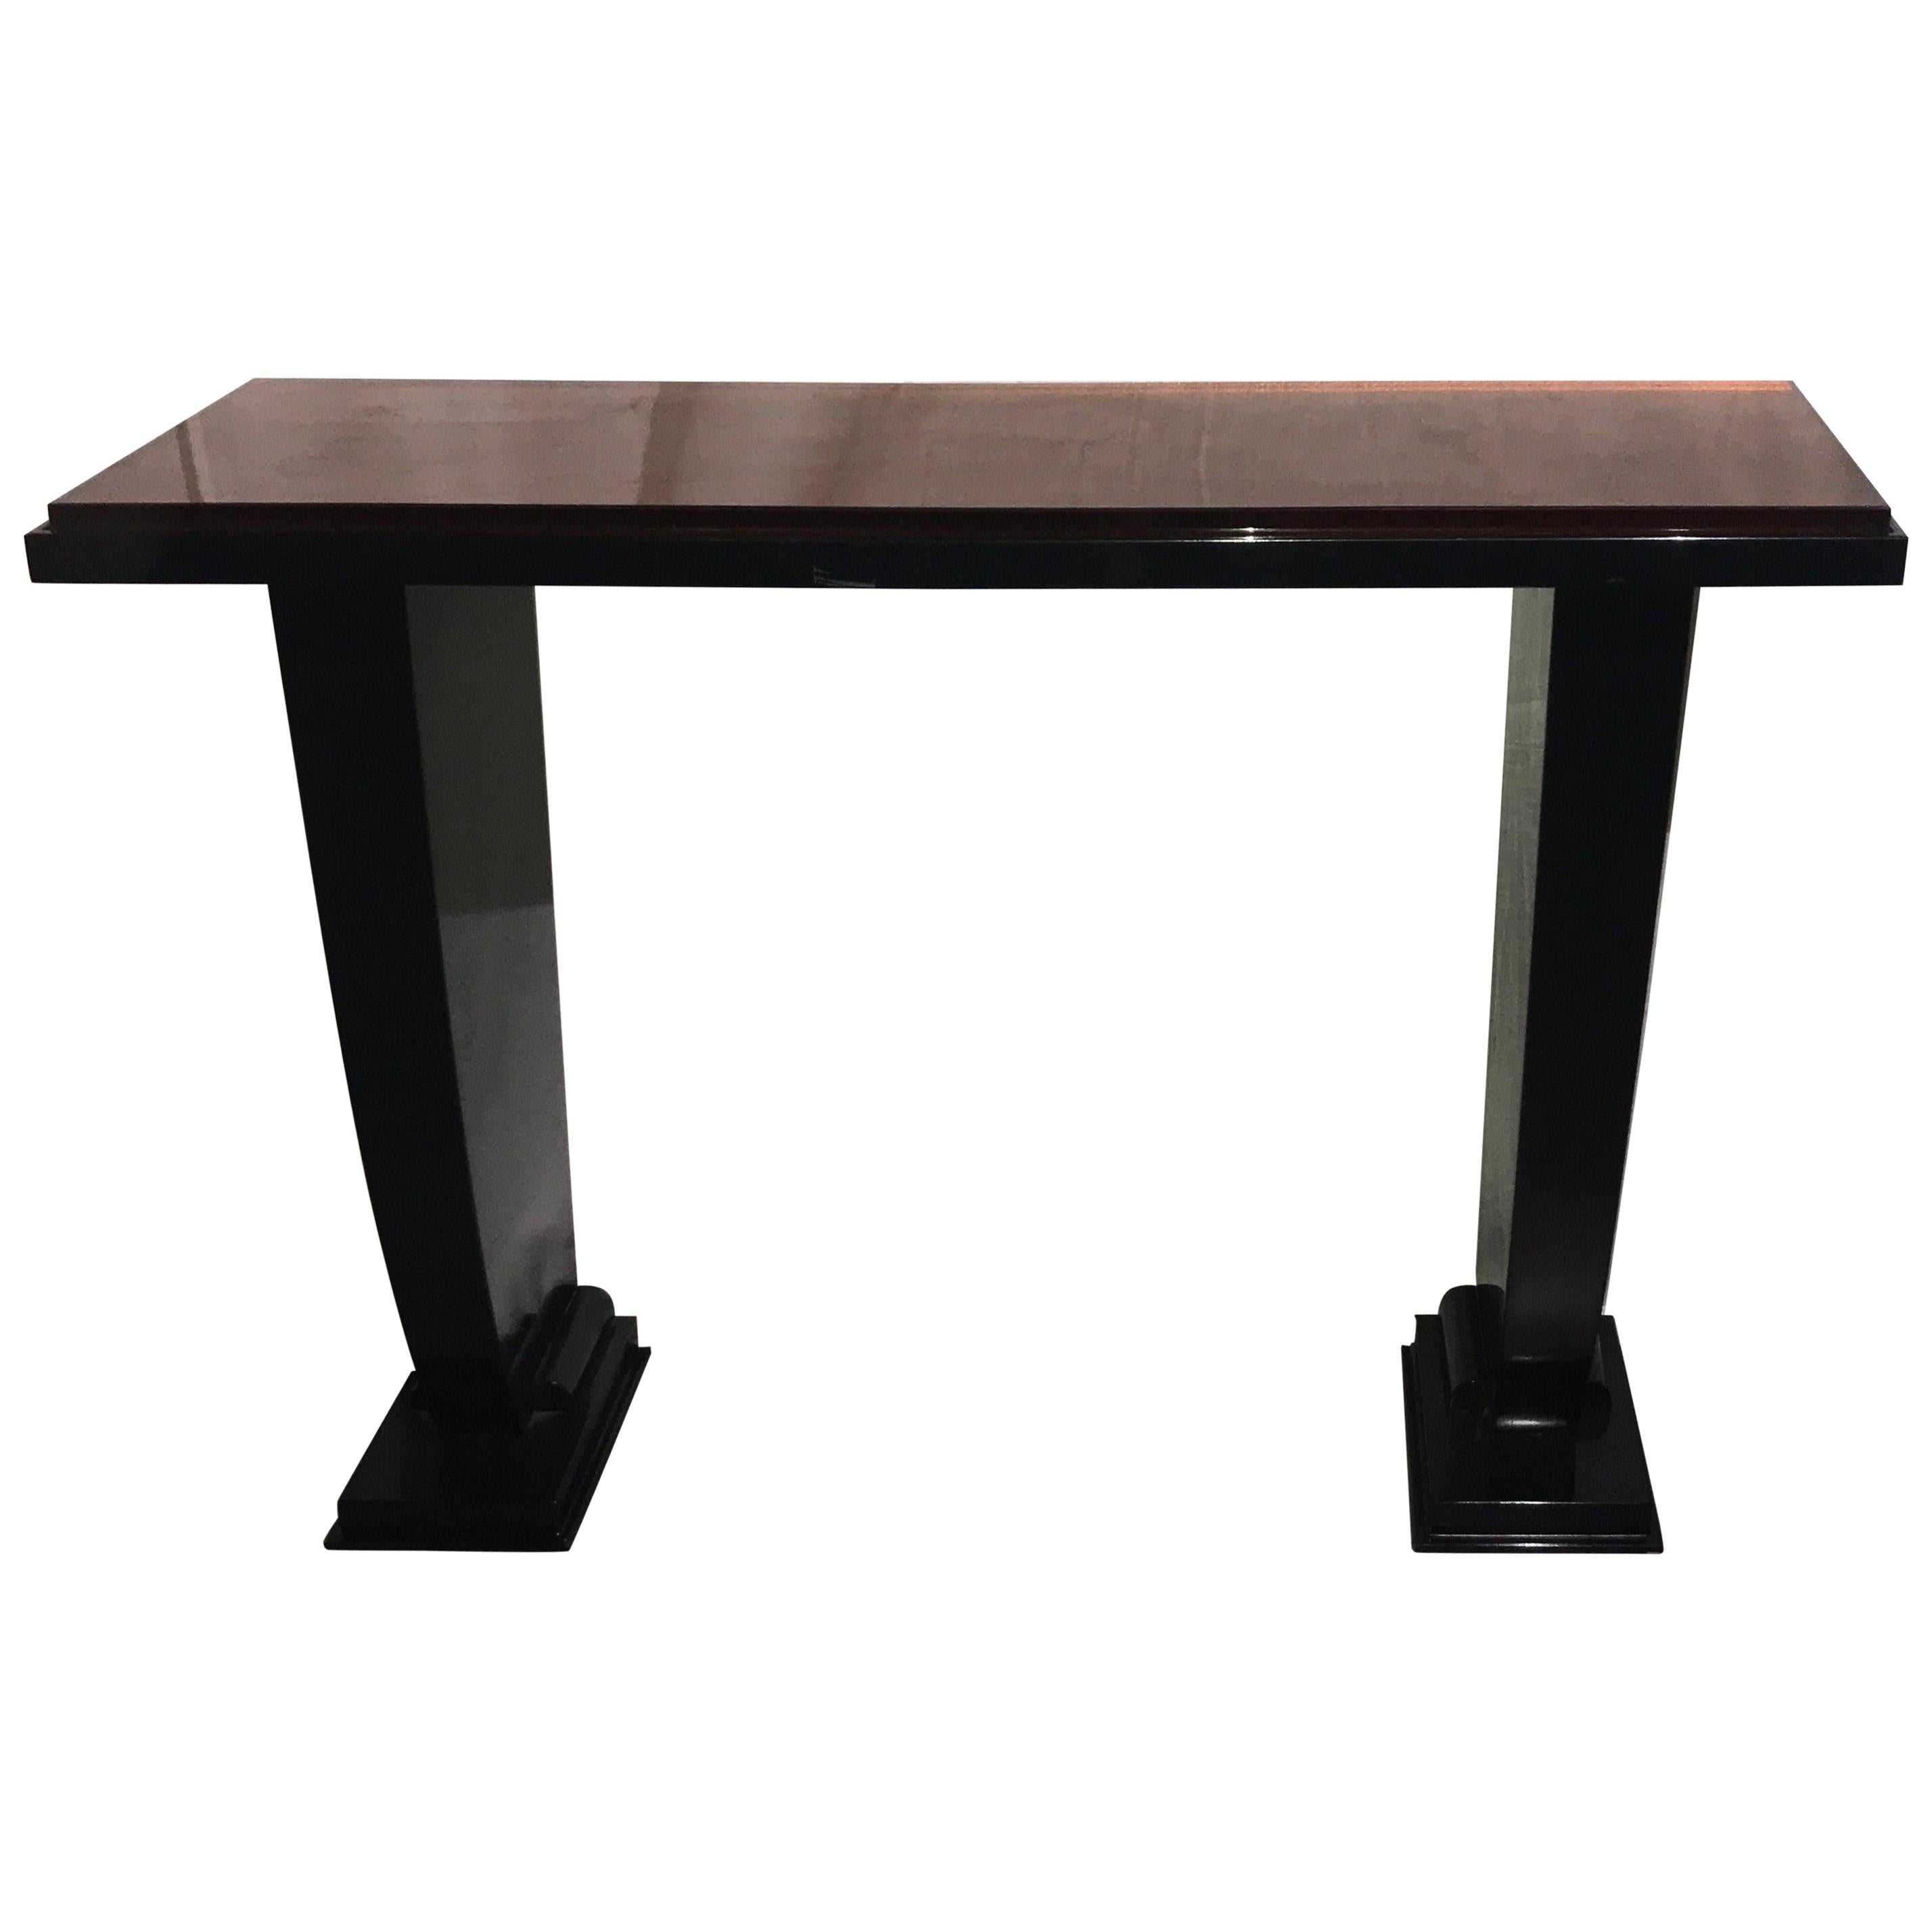 DIM Black Lacquer Wood Console, Saint Gobain Amber Glass Slab Top, France, 1930 For Sale